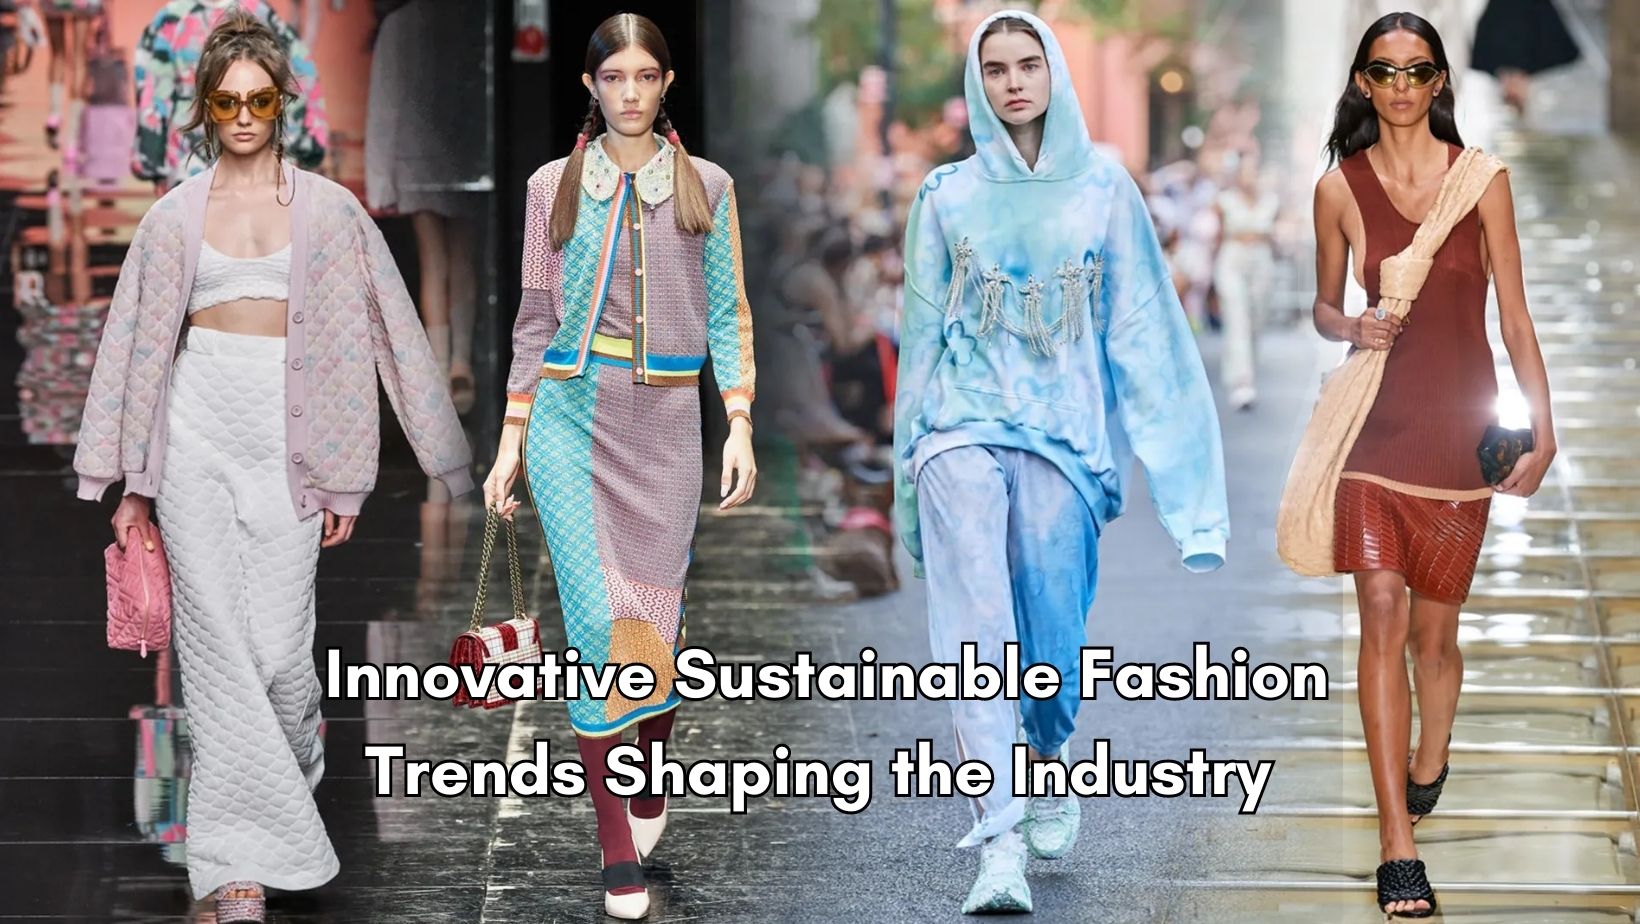 Eco-Friendly Materials and Sustainable Fashion Trends